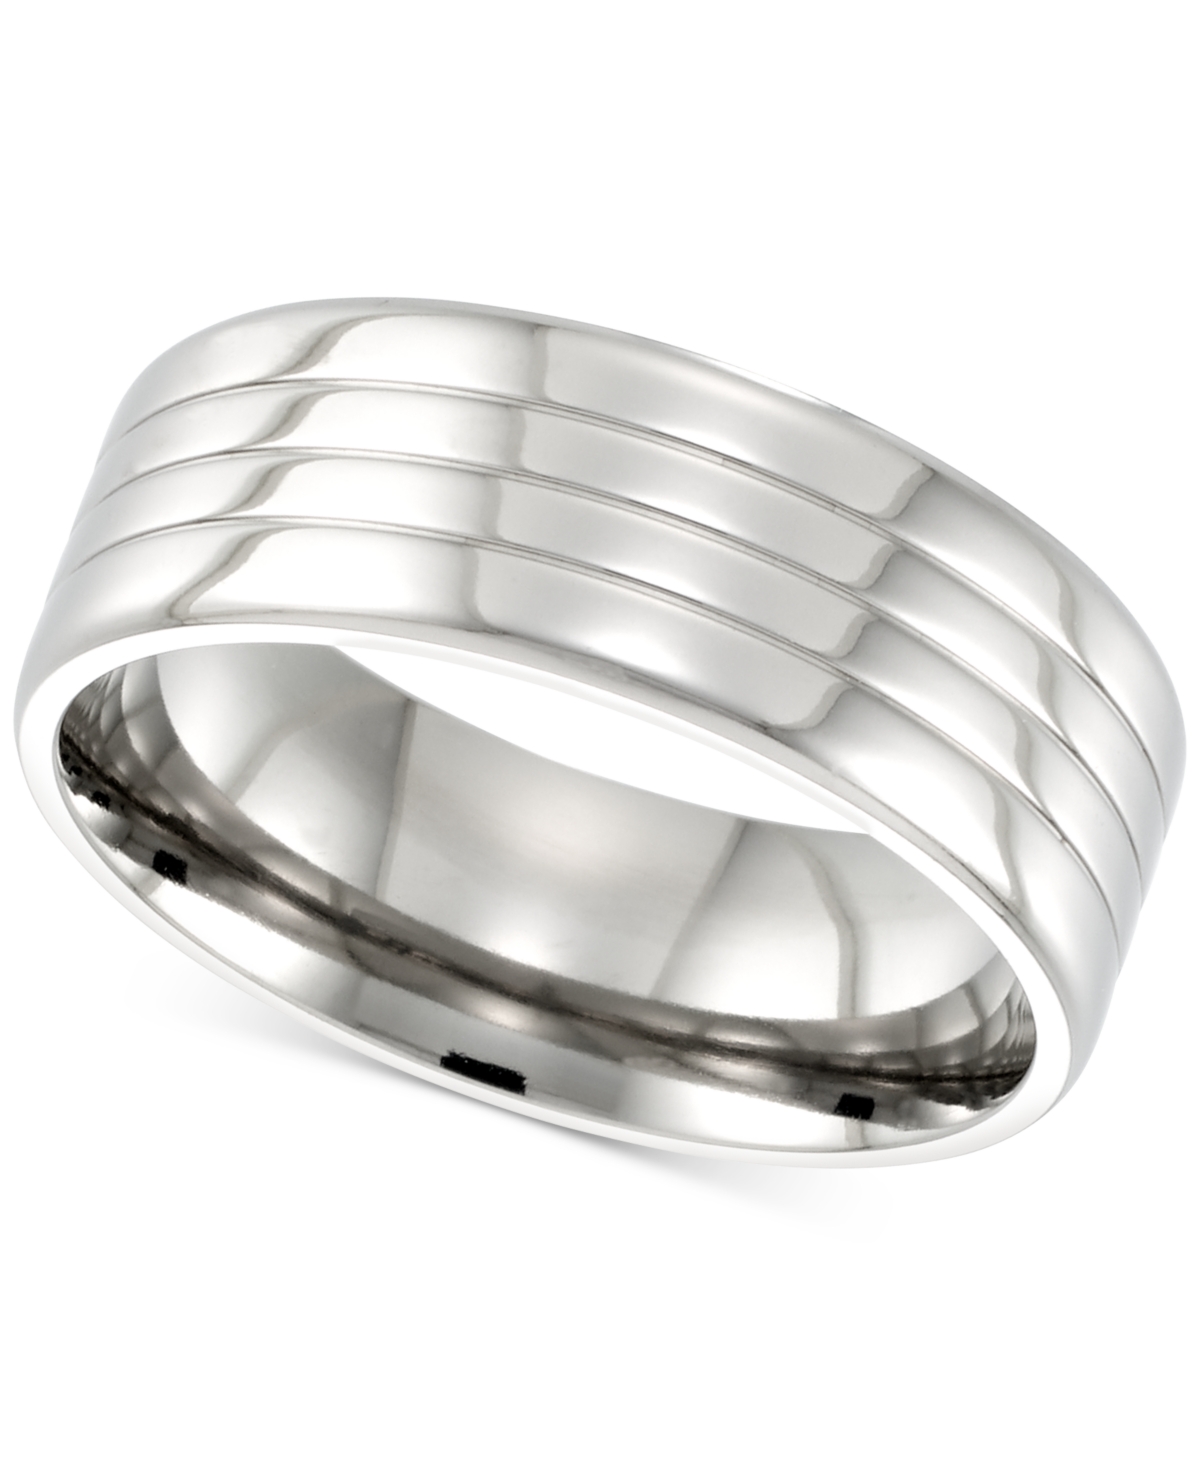 Smith Textured Ring in Stainless Steel - Stainless Steel